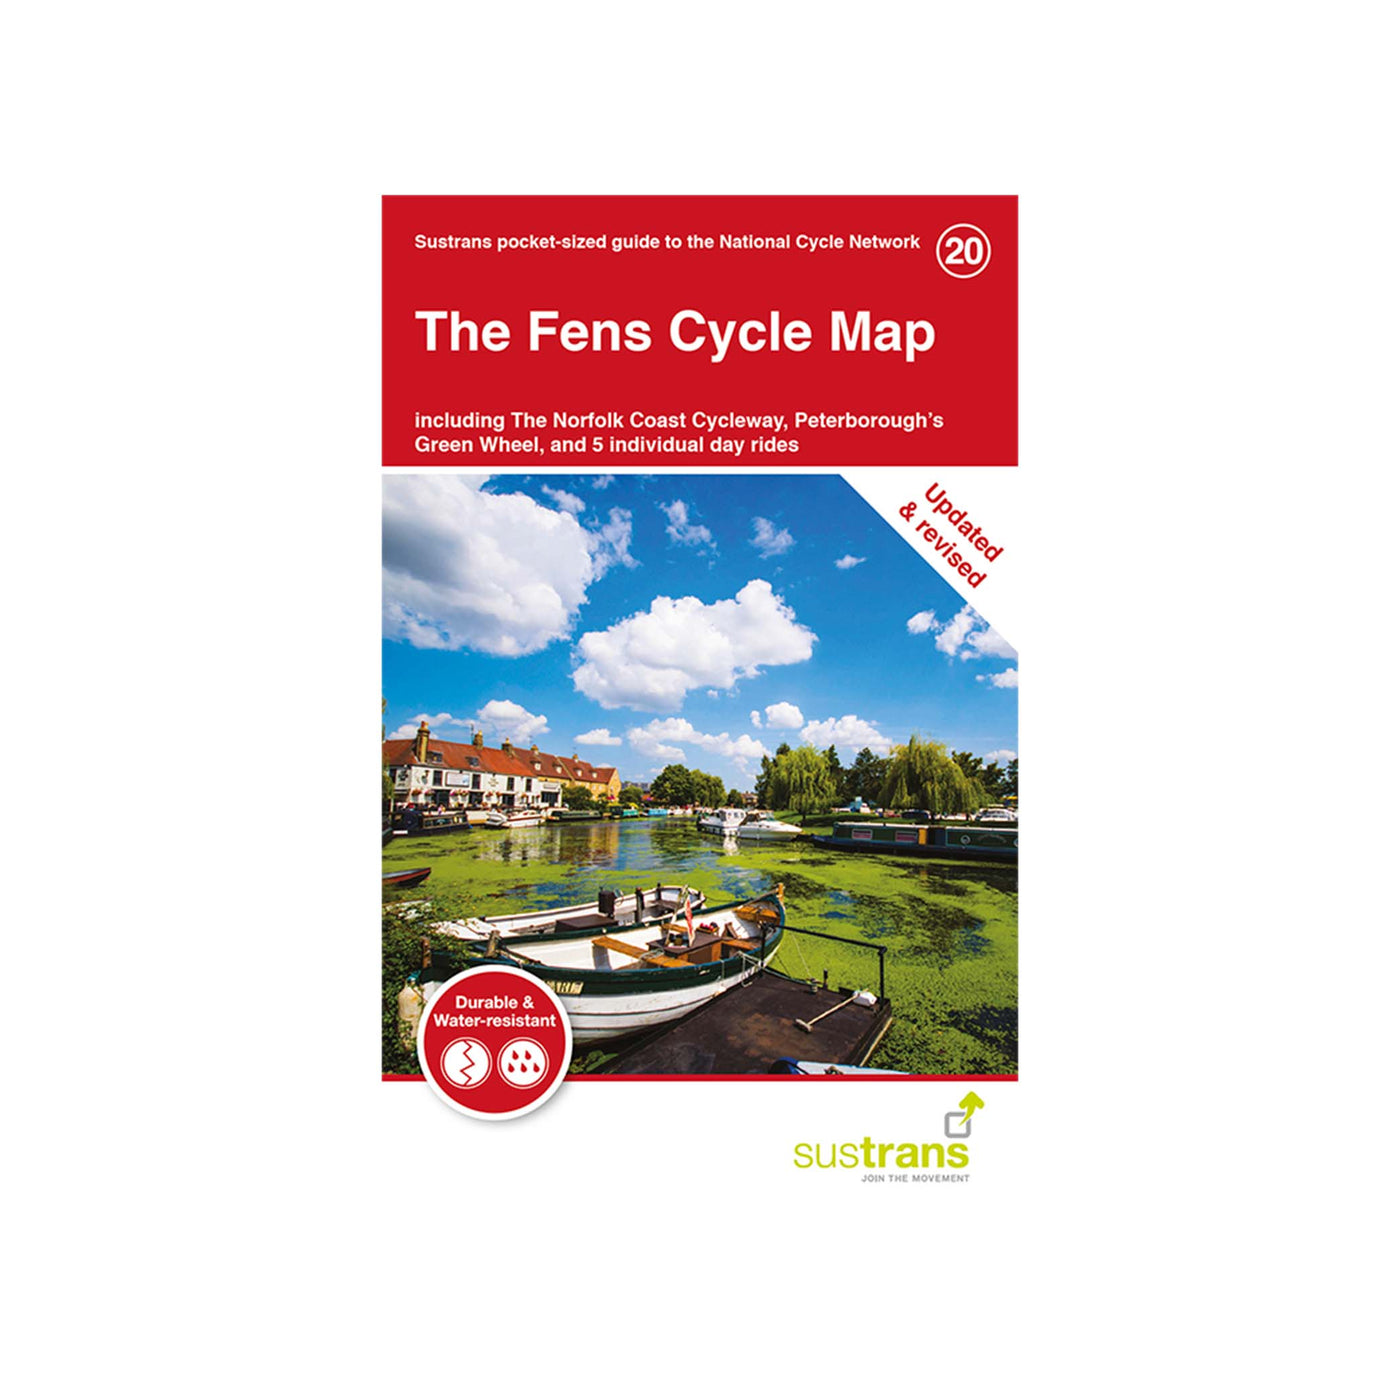 The Fens Cycle Map